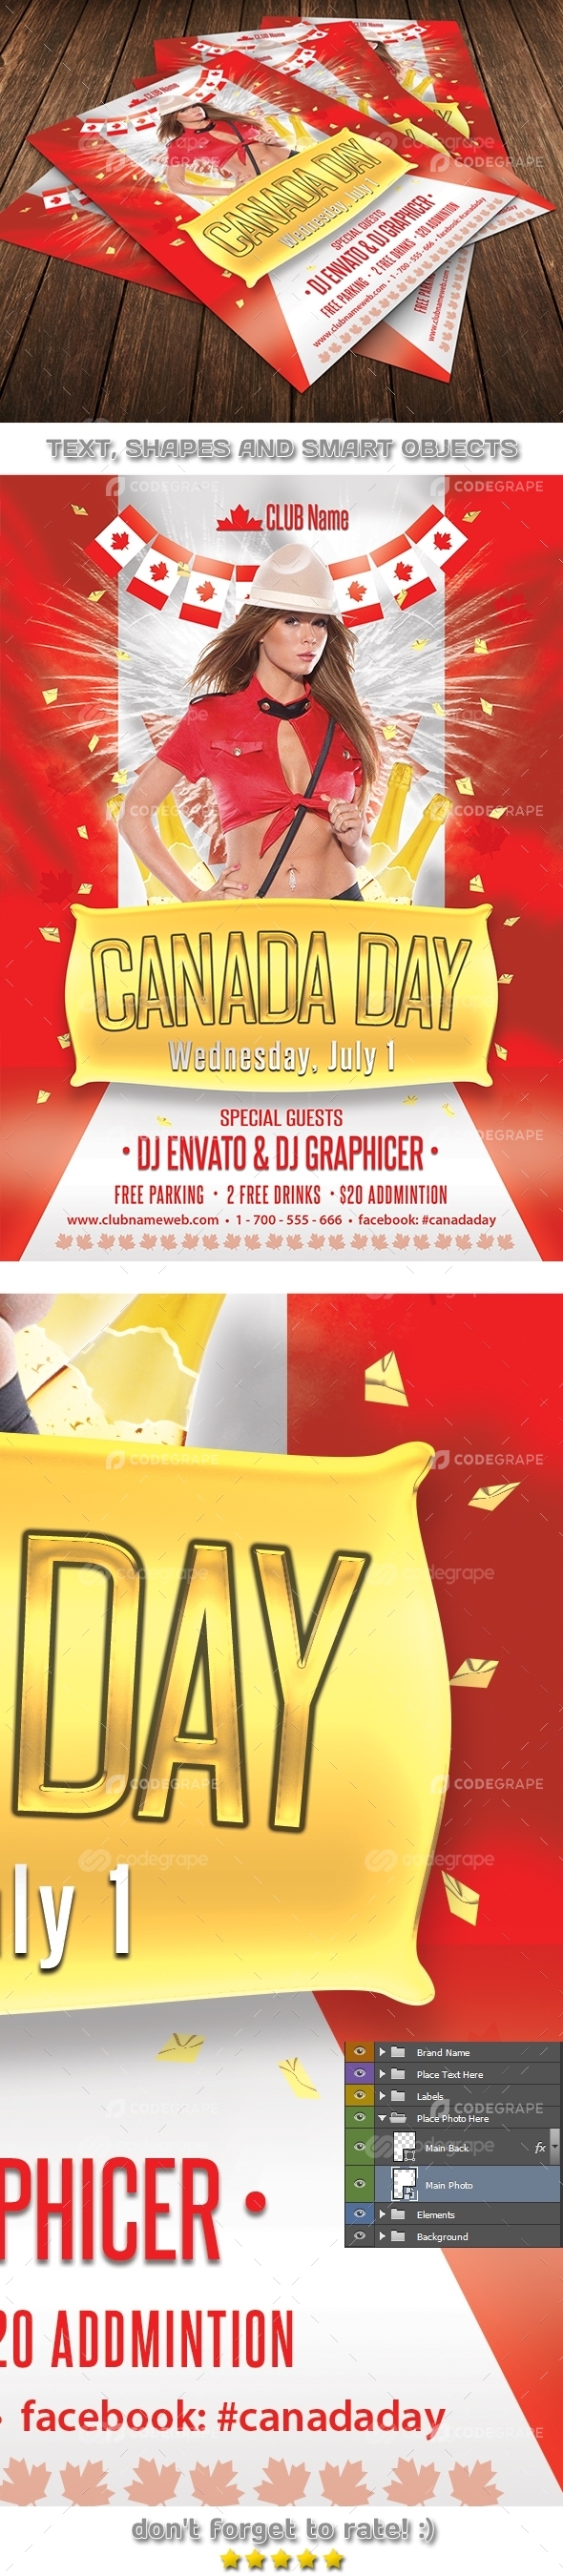 Canada Day Celebration Flyer Template